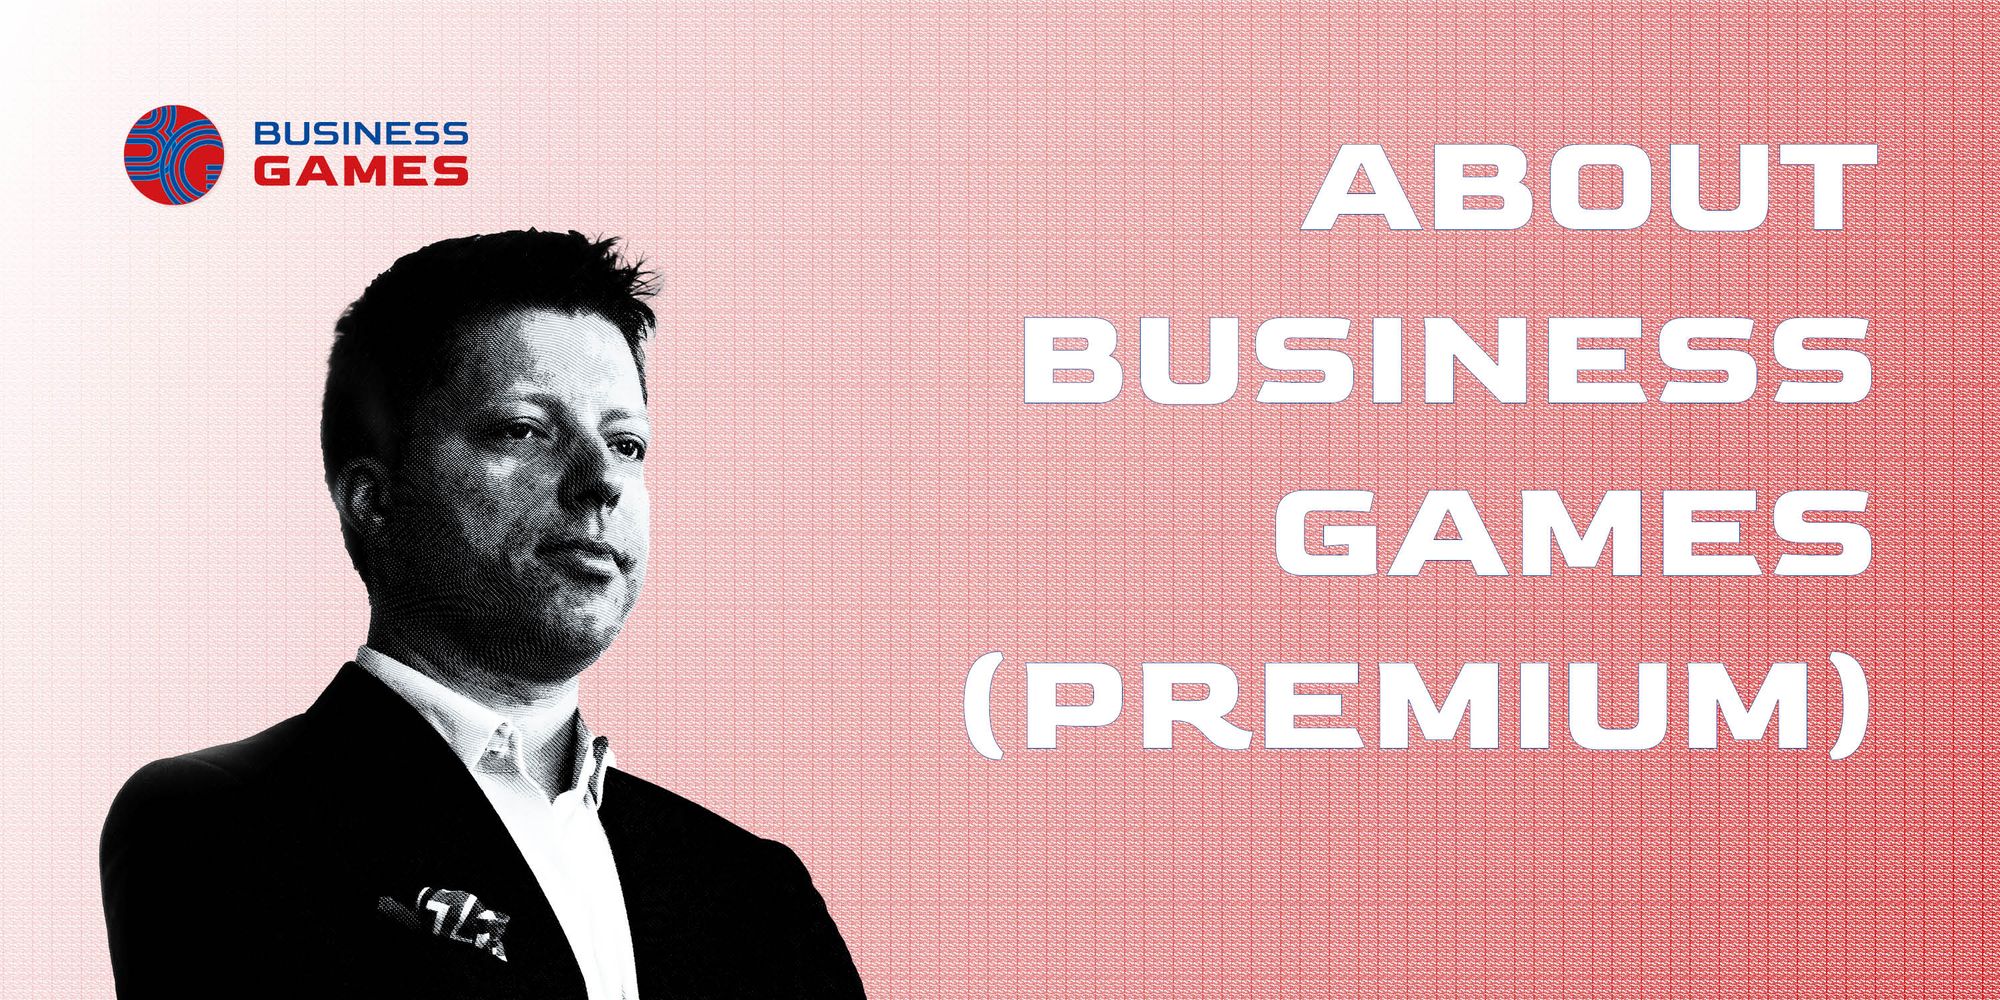 About Business Games Premium